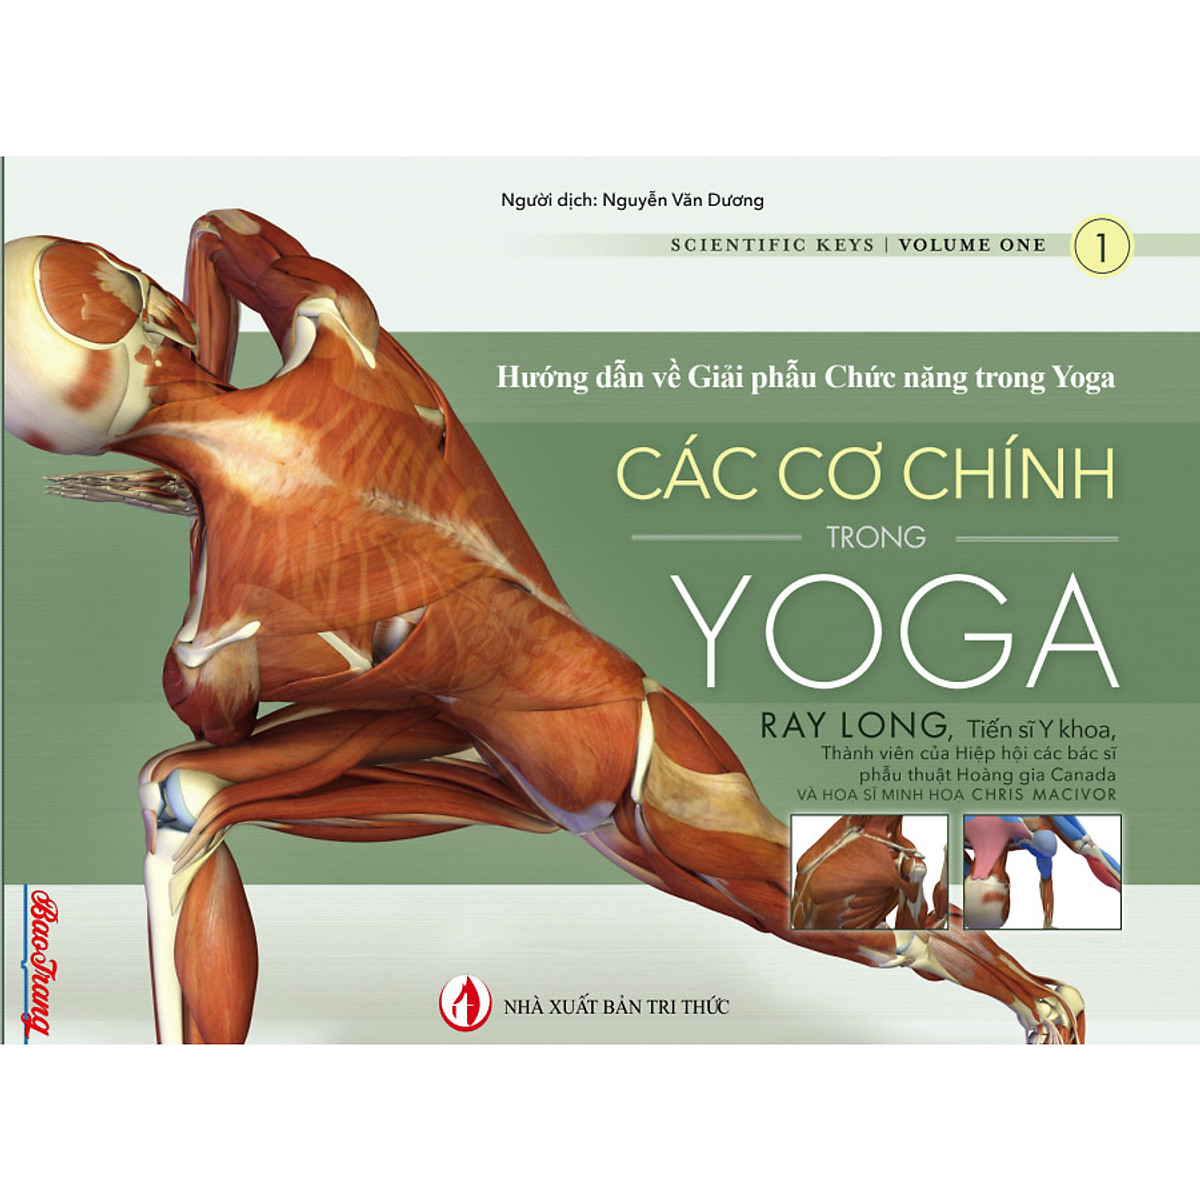 02-Cac Co Chinh trong Yoga